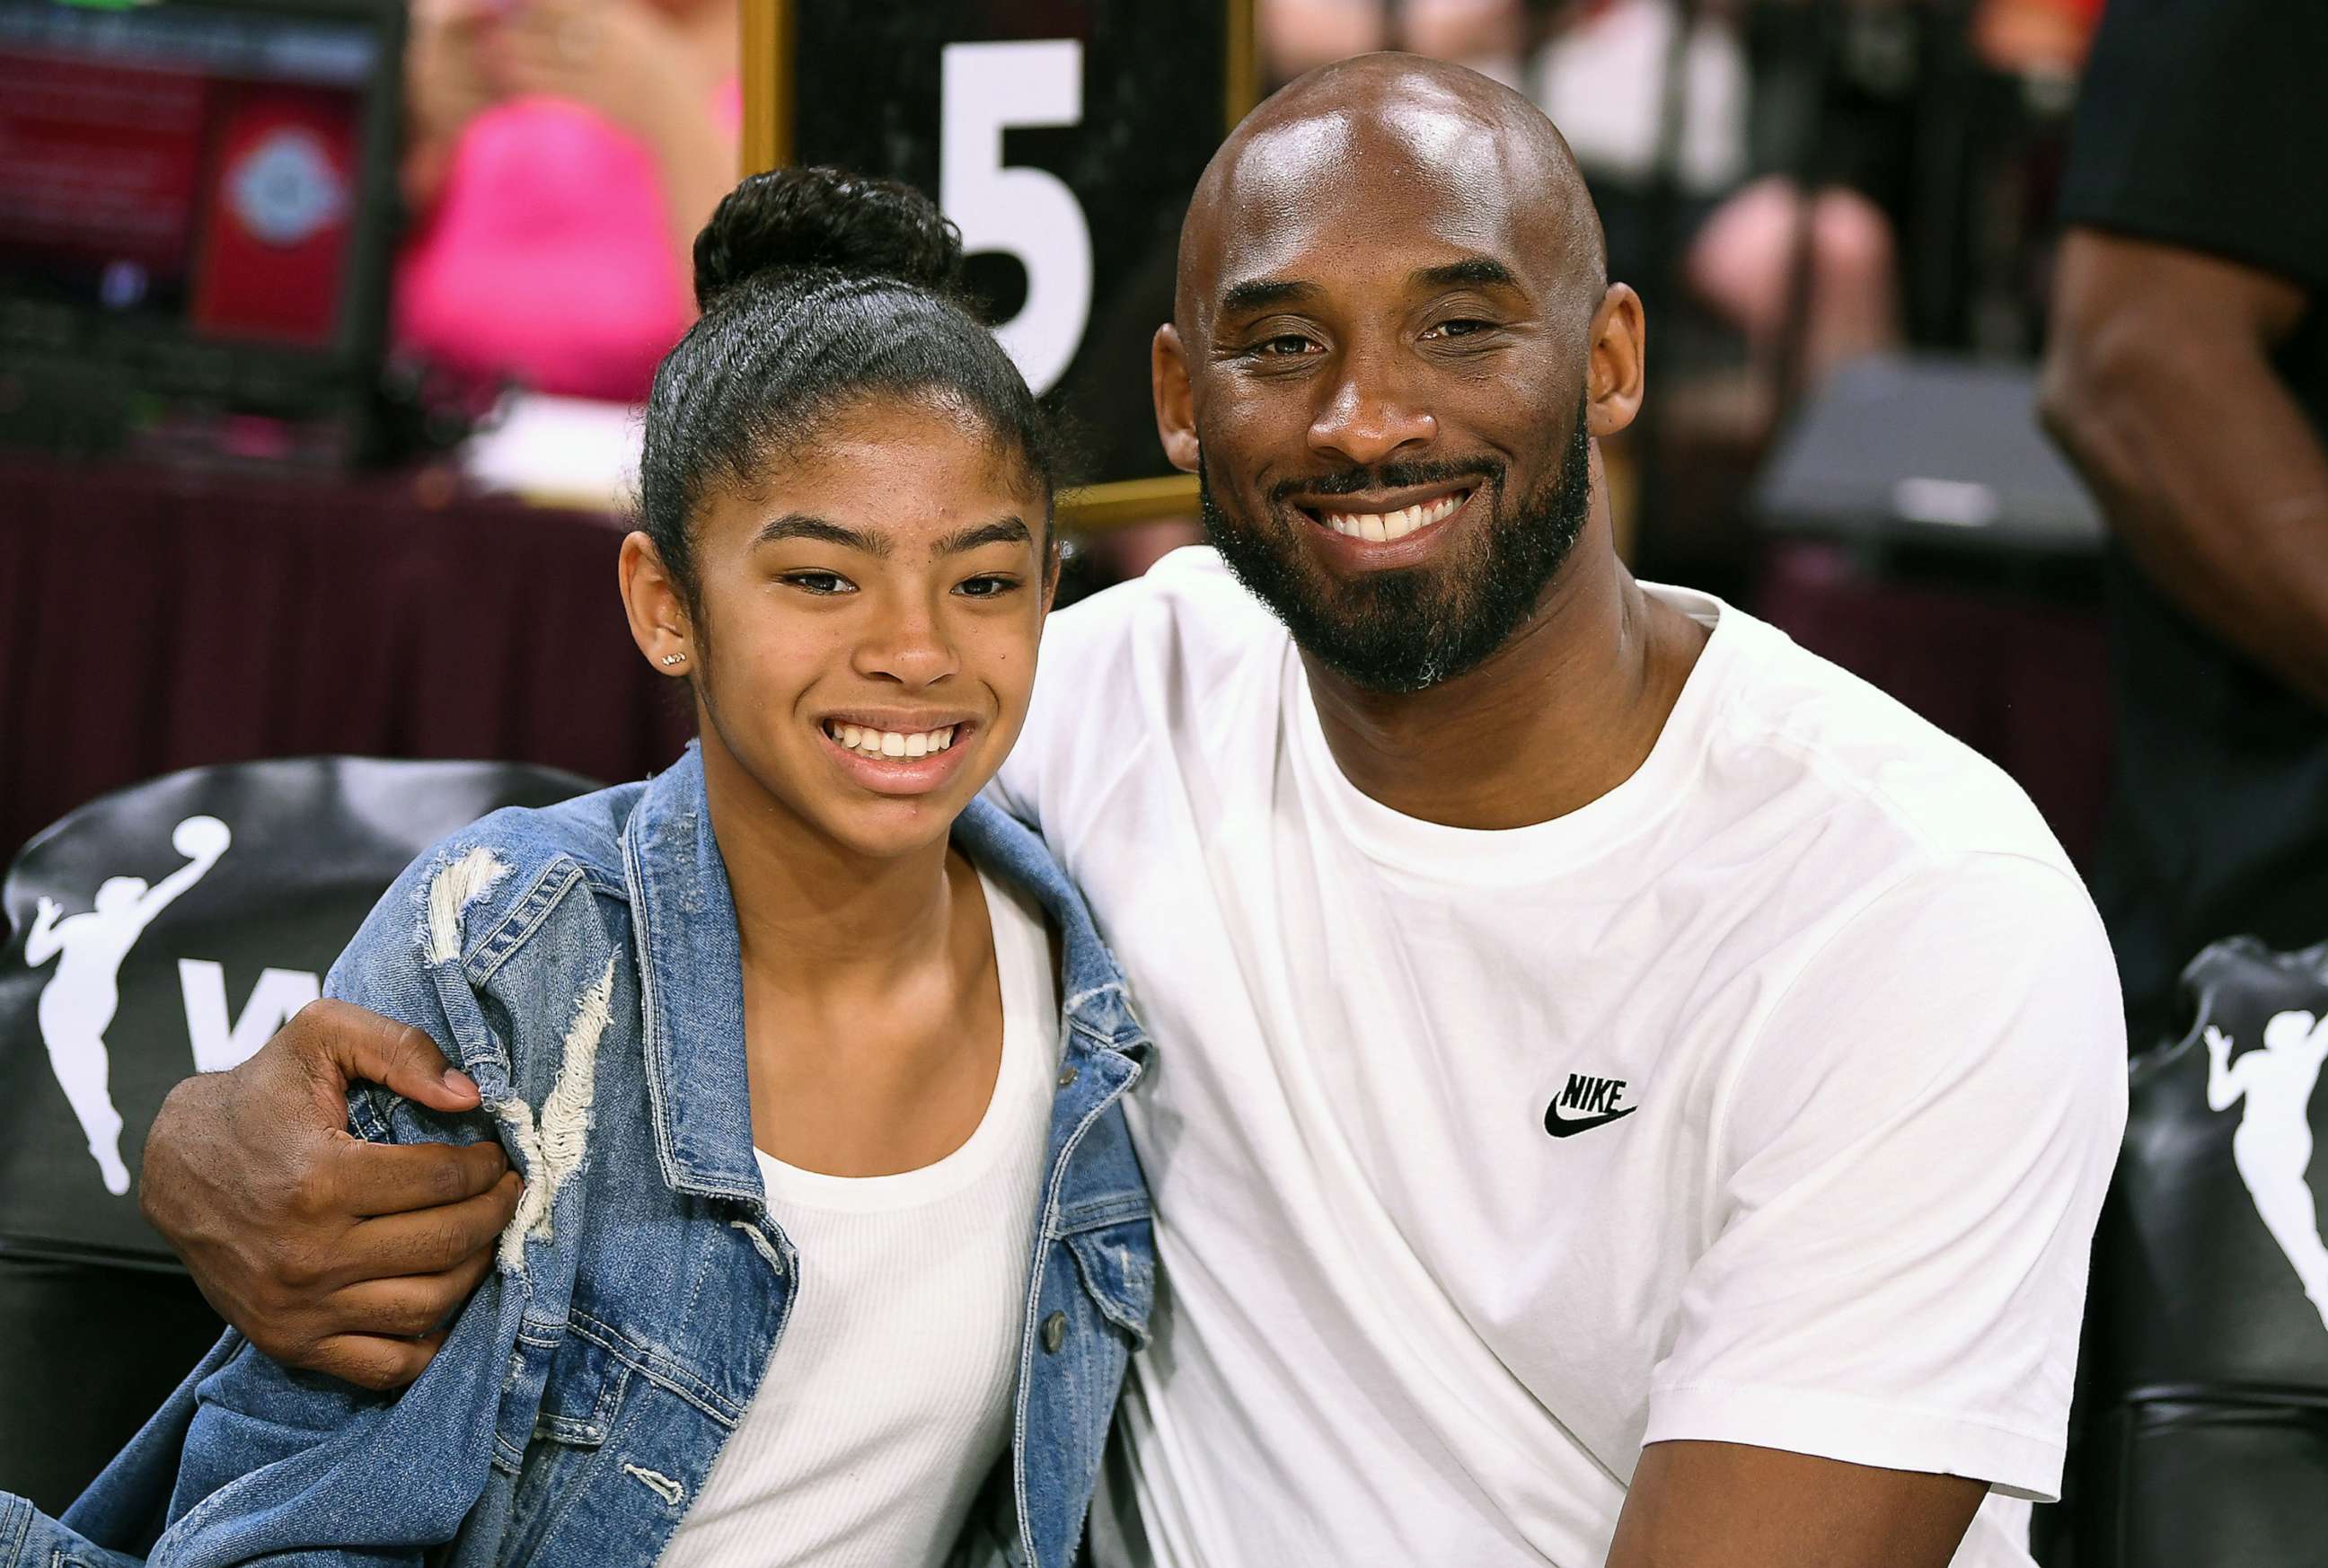 PHOTO: Gianna and Kobe Bryant at the WNBA All Star Game at Mandalay Bay Events Center, Jul 27, 2019, in Las Vegas.